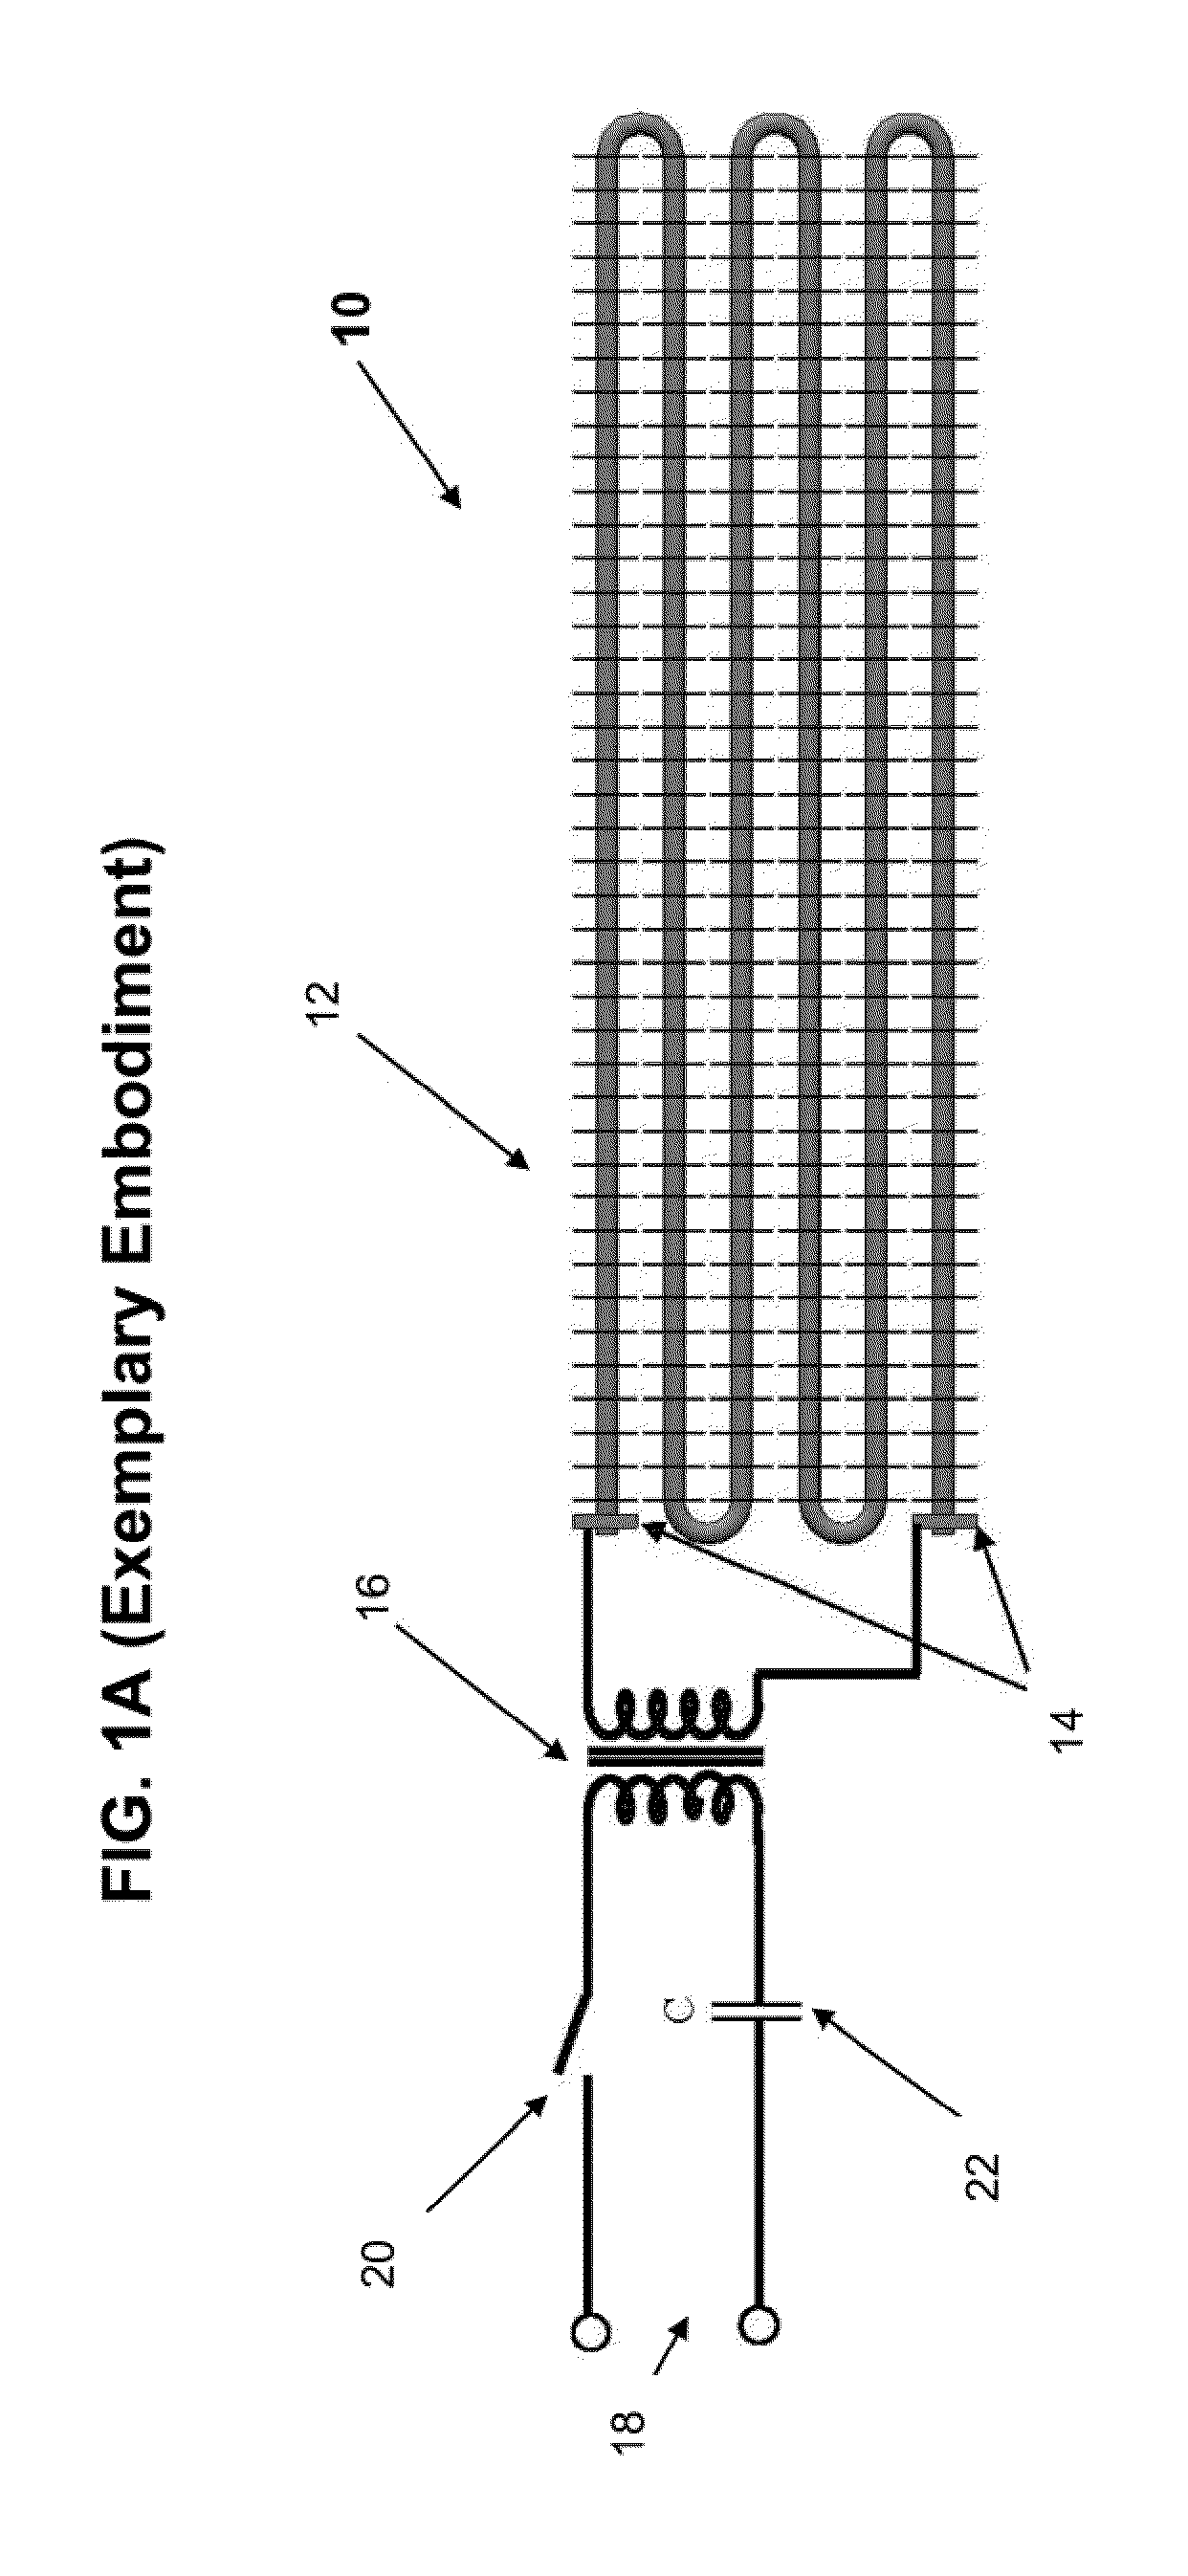 System and Method for Energy-Saving Inductive Heating of Evaporators and Other Heat-Exchangers